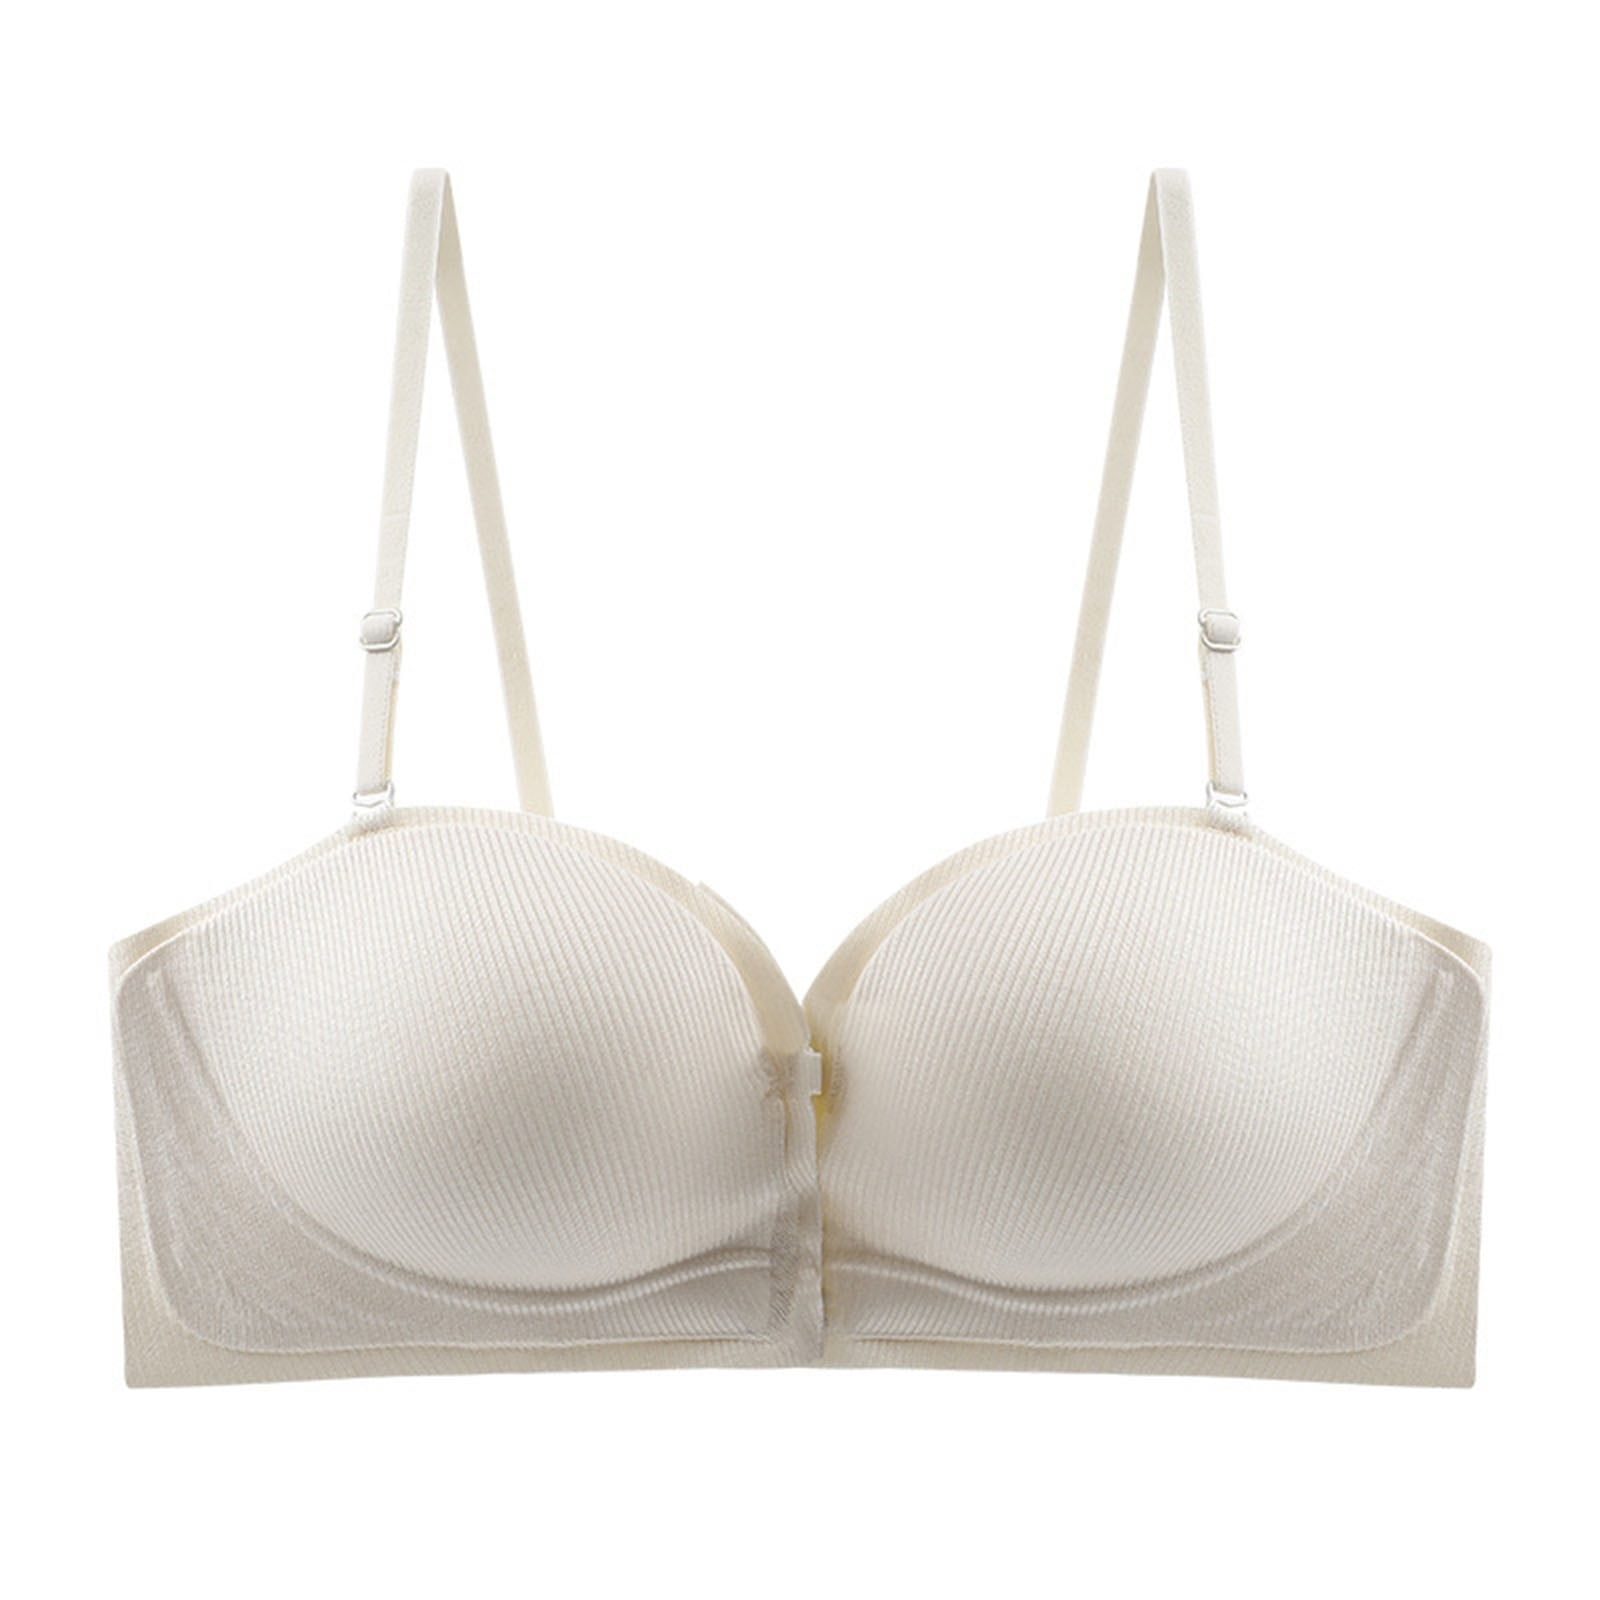 PAERLAN Front Closure Wire Free Standing Cotton Push Up Bra Spring Seamless  Small Breasts Together Adjusted White Bra Straps 201202 From Dou01, $14.53